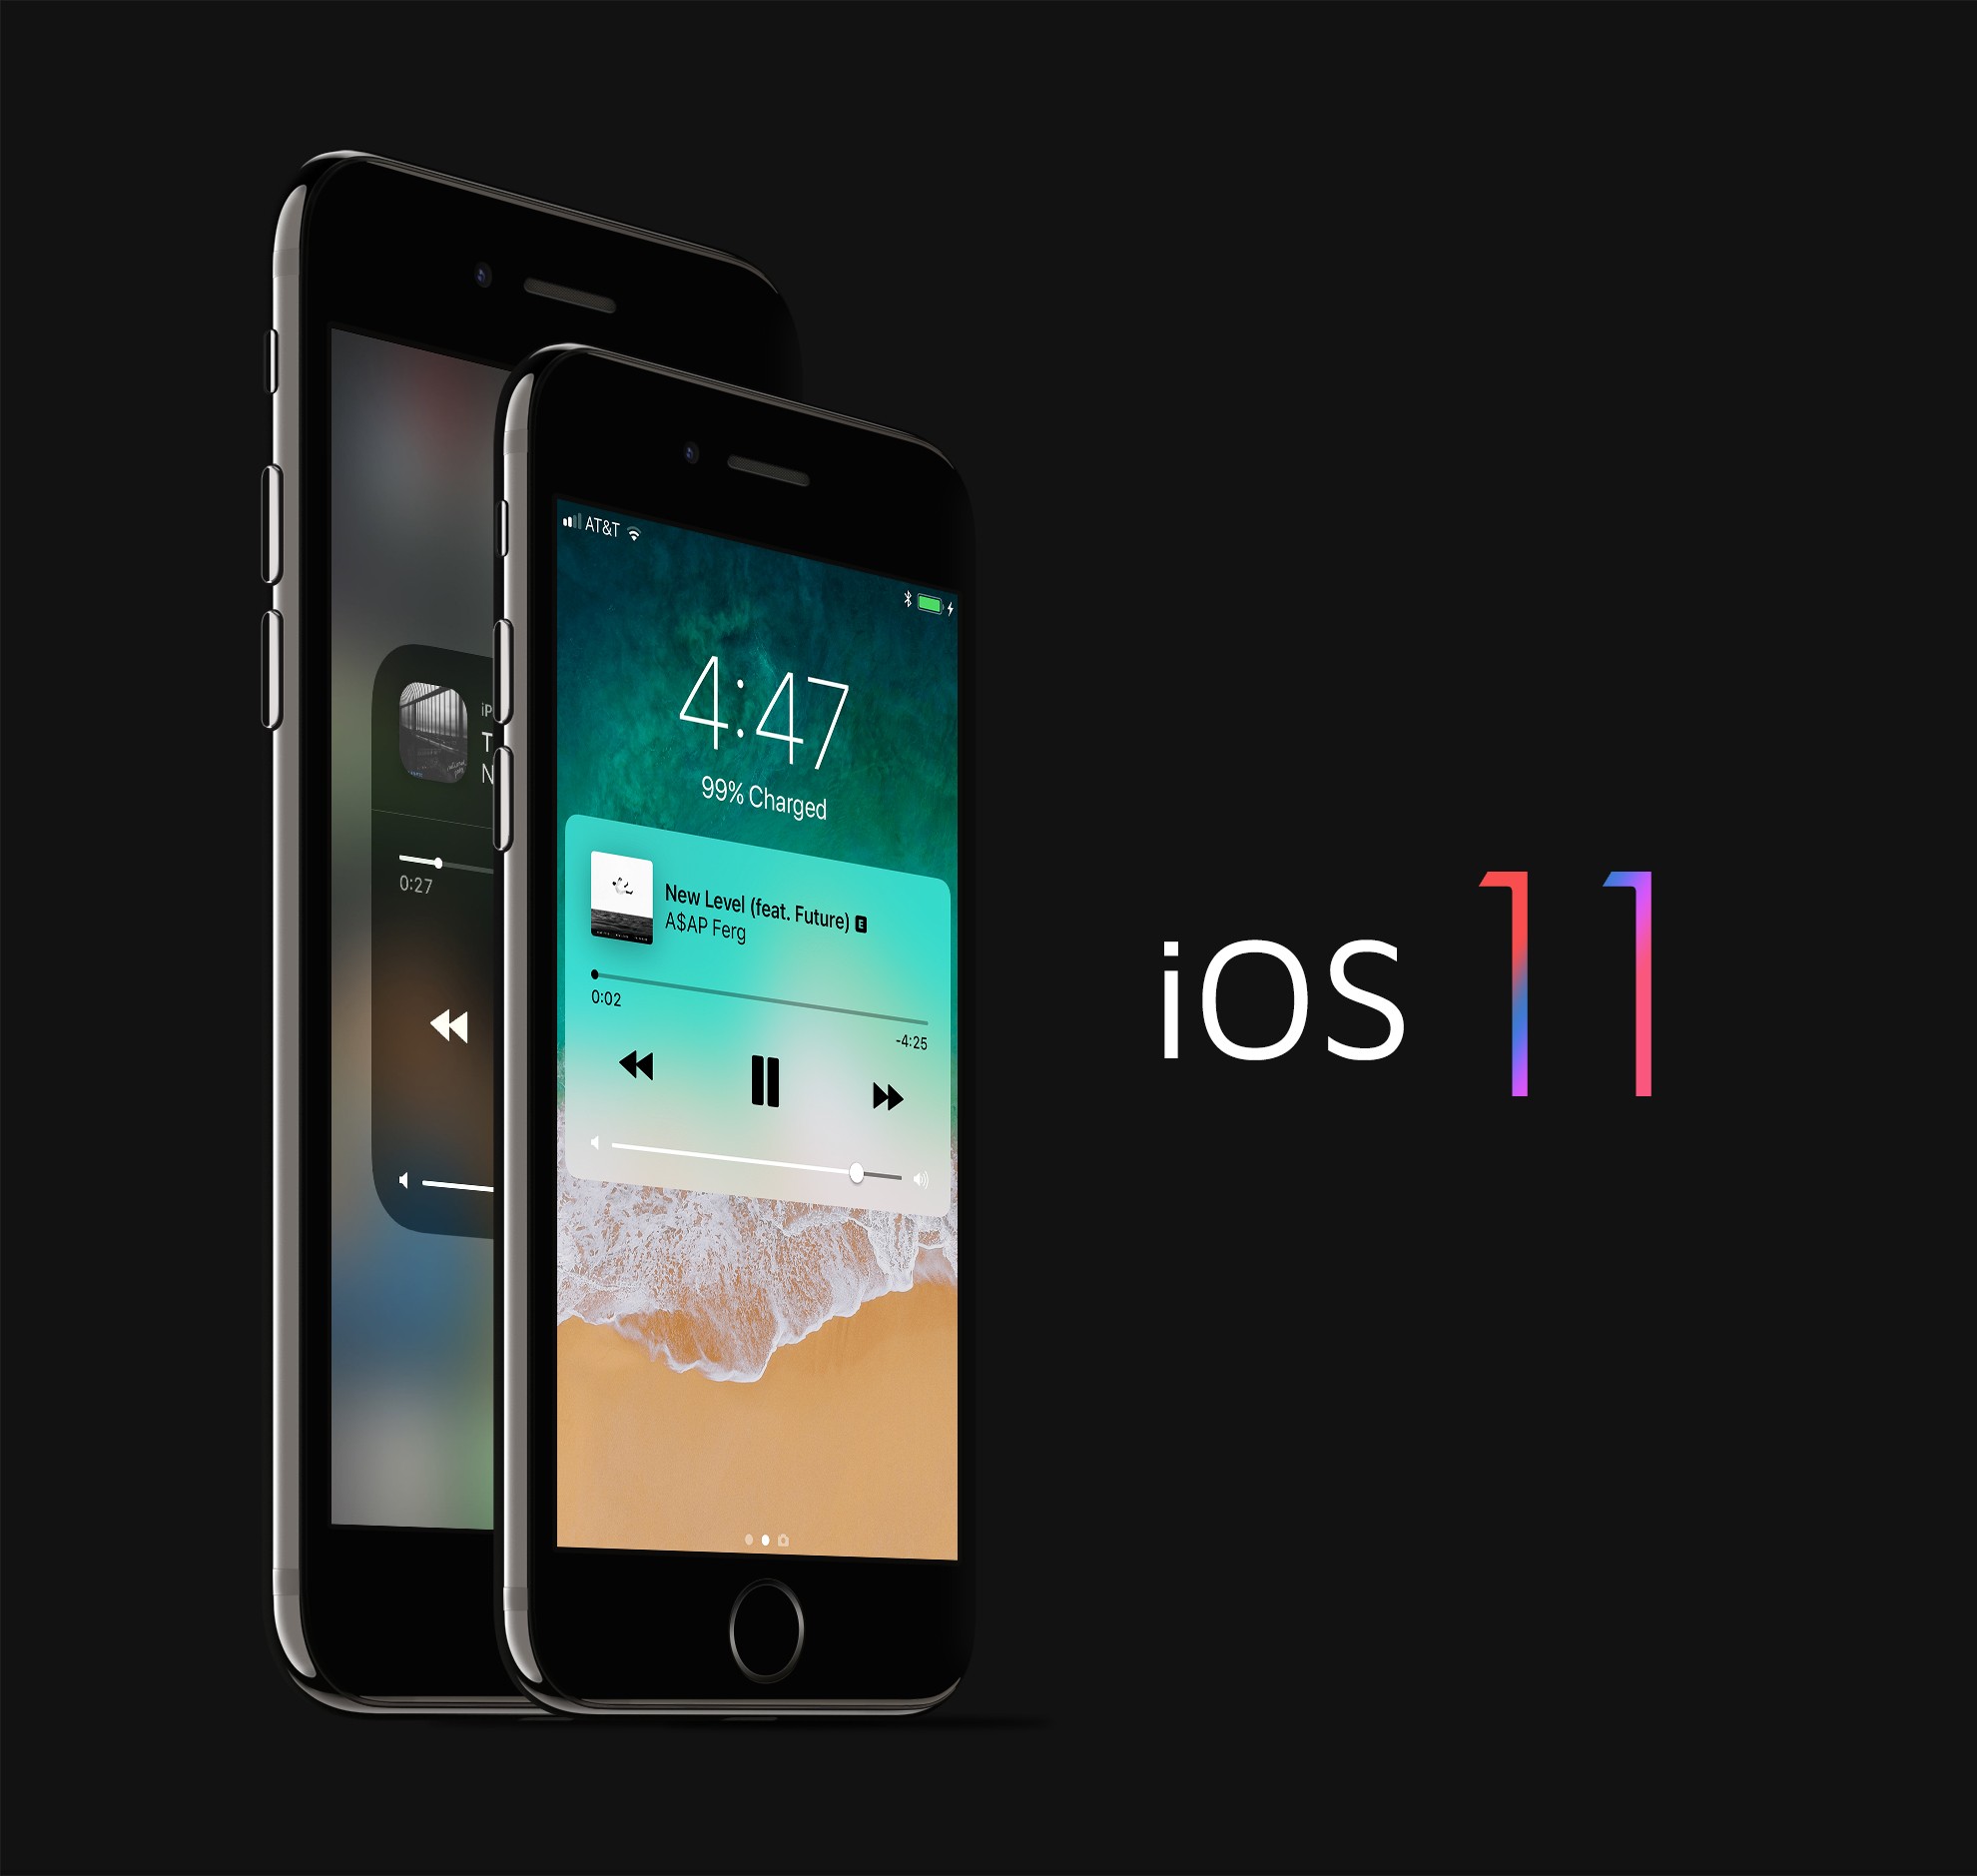 Get To Know iOS 11 by Apple Inc.